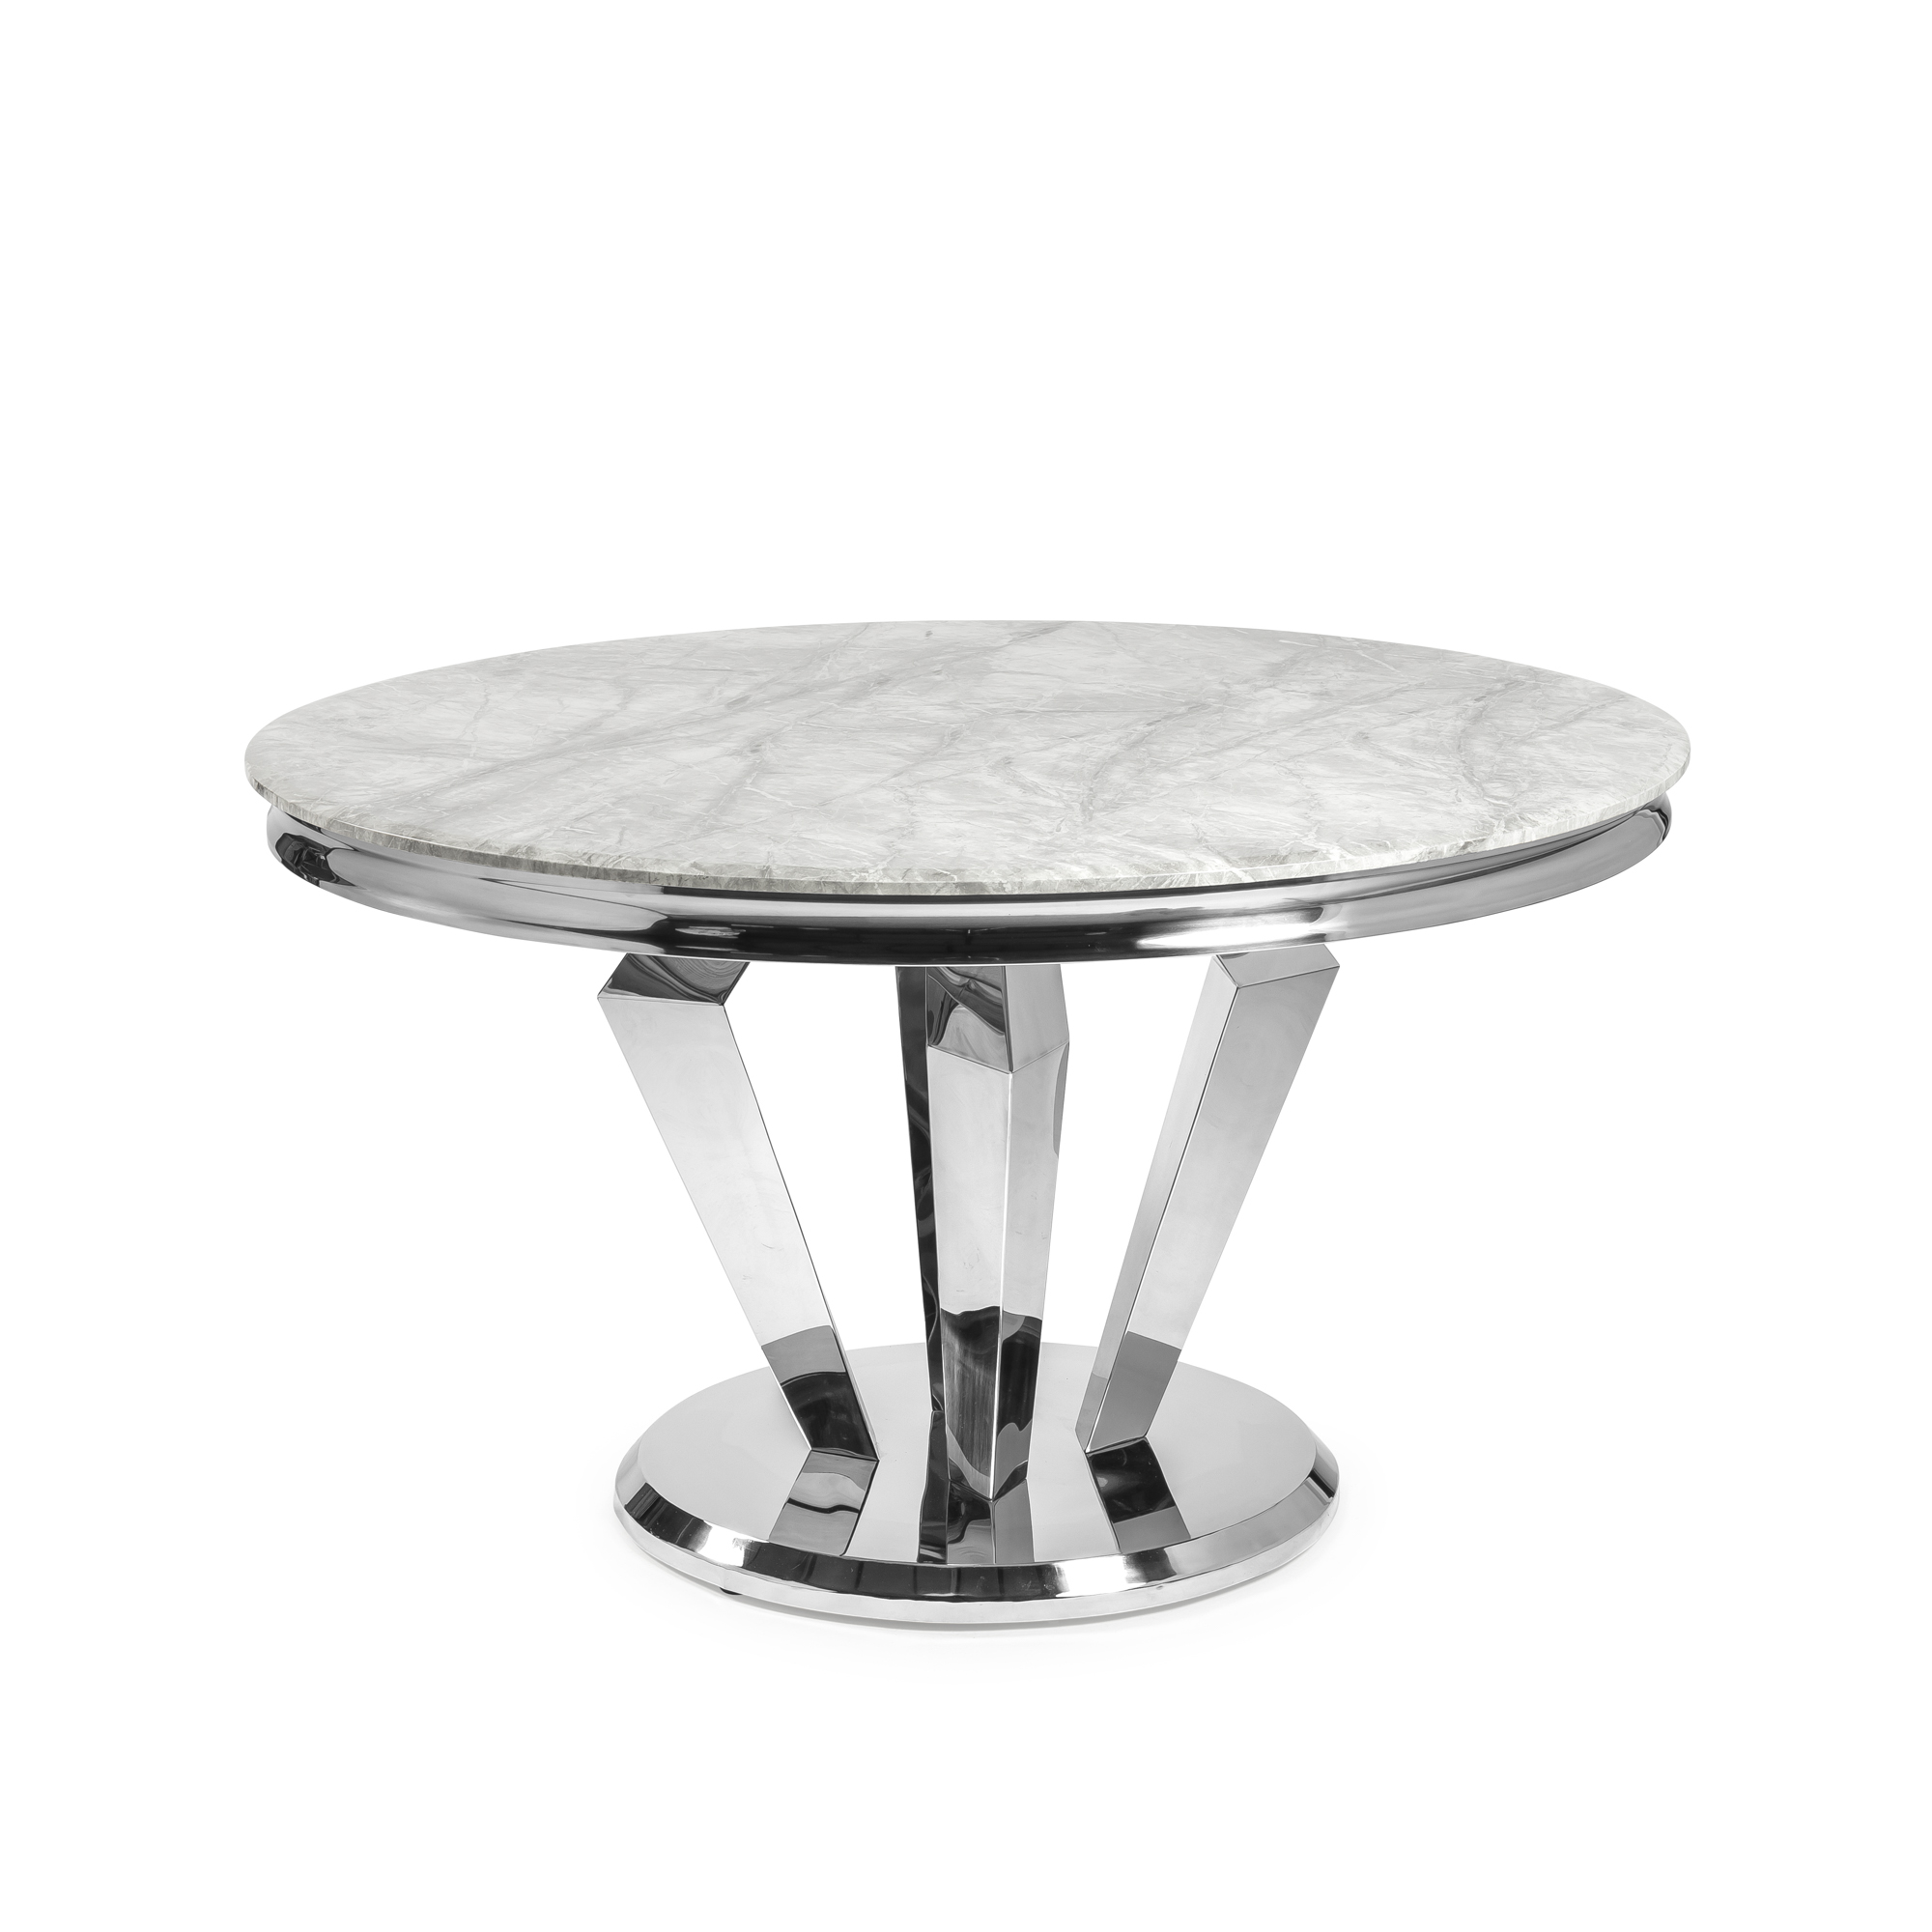 1.3M Polished Round Grey Marble Dining Room Table With Stainless Steel Frame